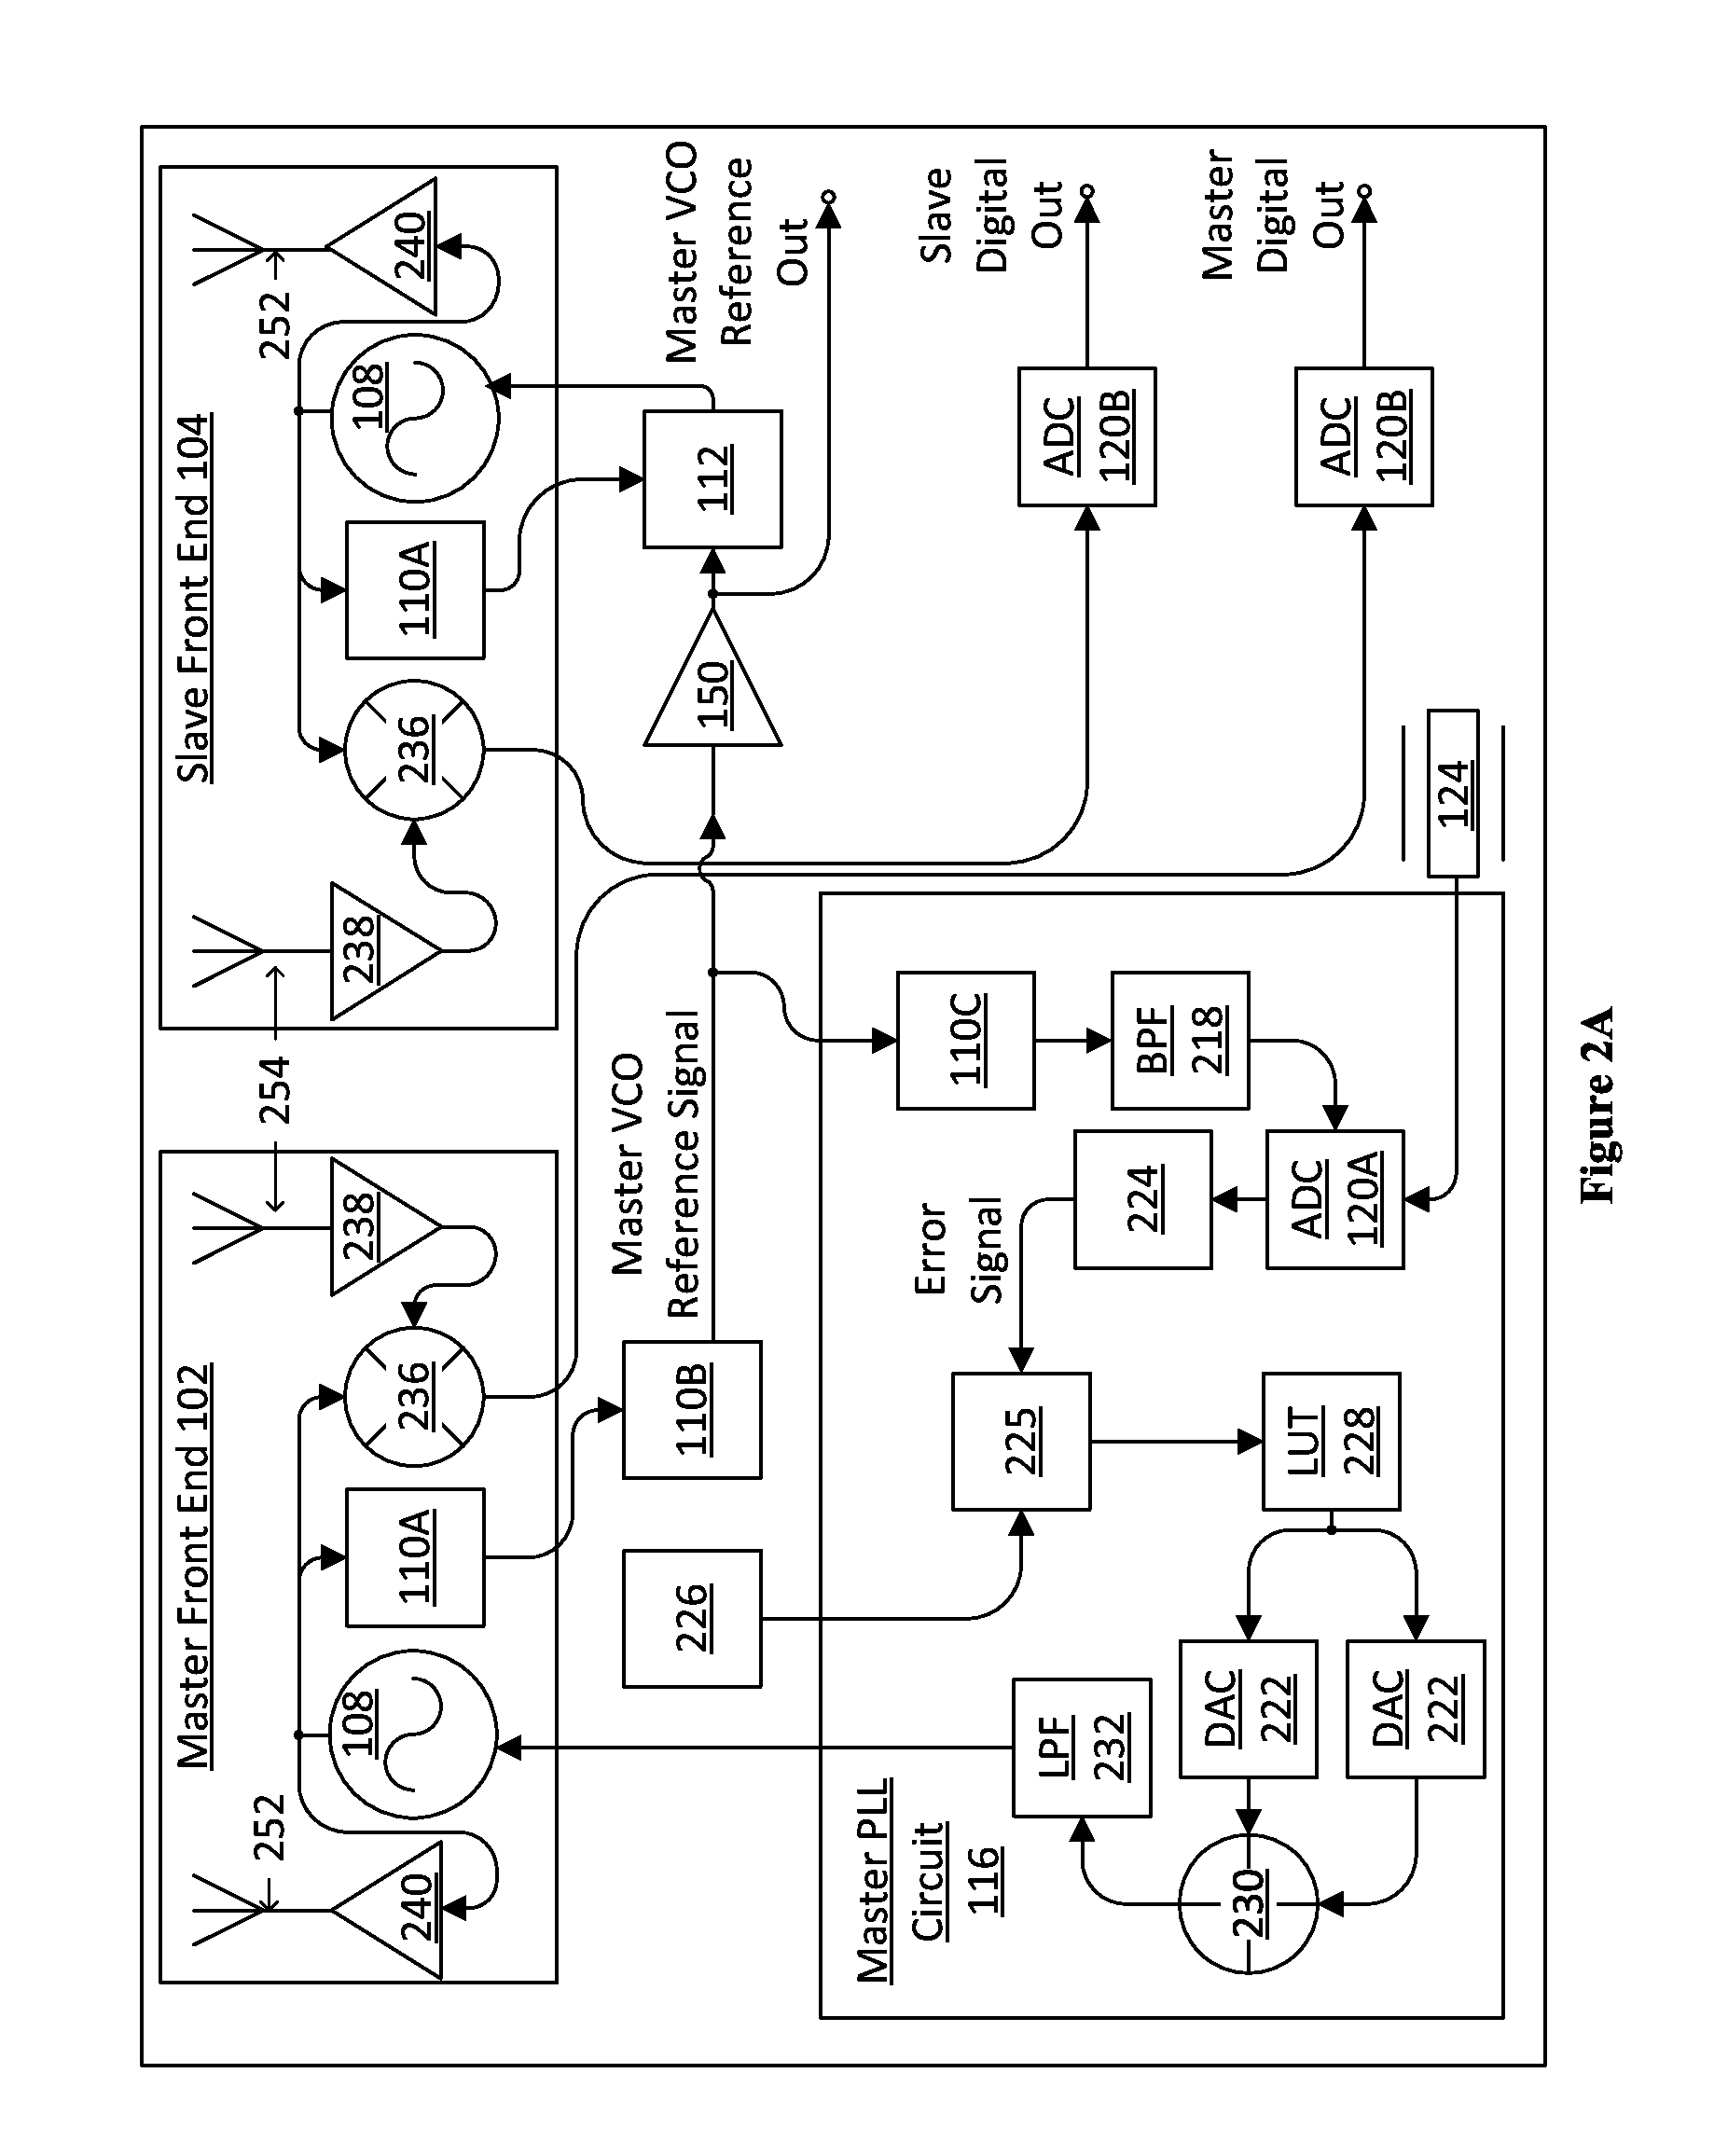 System and Method for Synchronizing Multiple Oscillators Using Reduced Frequency Signaling